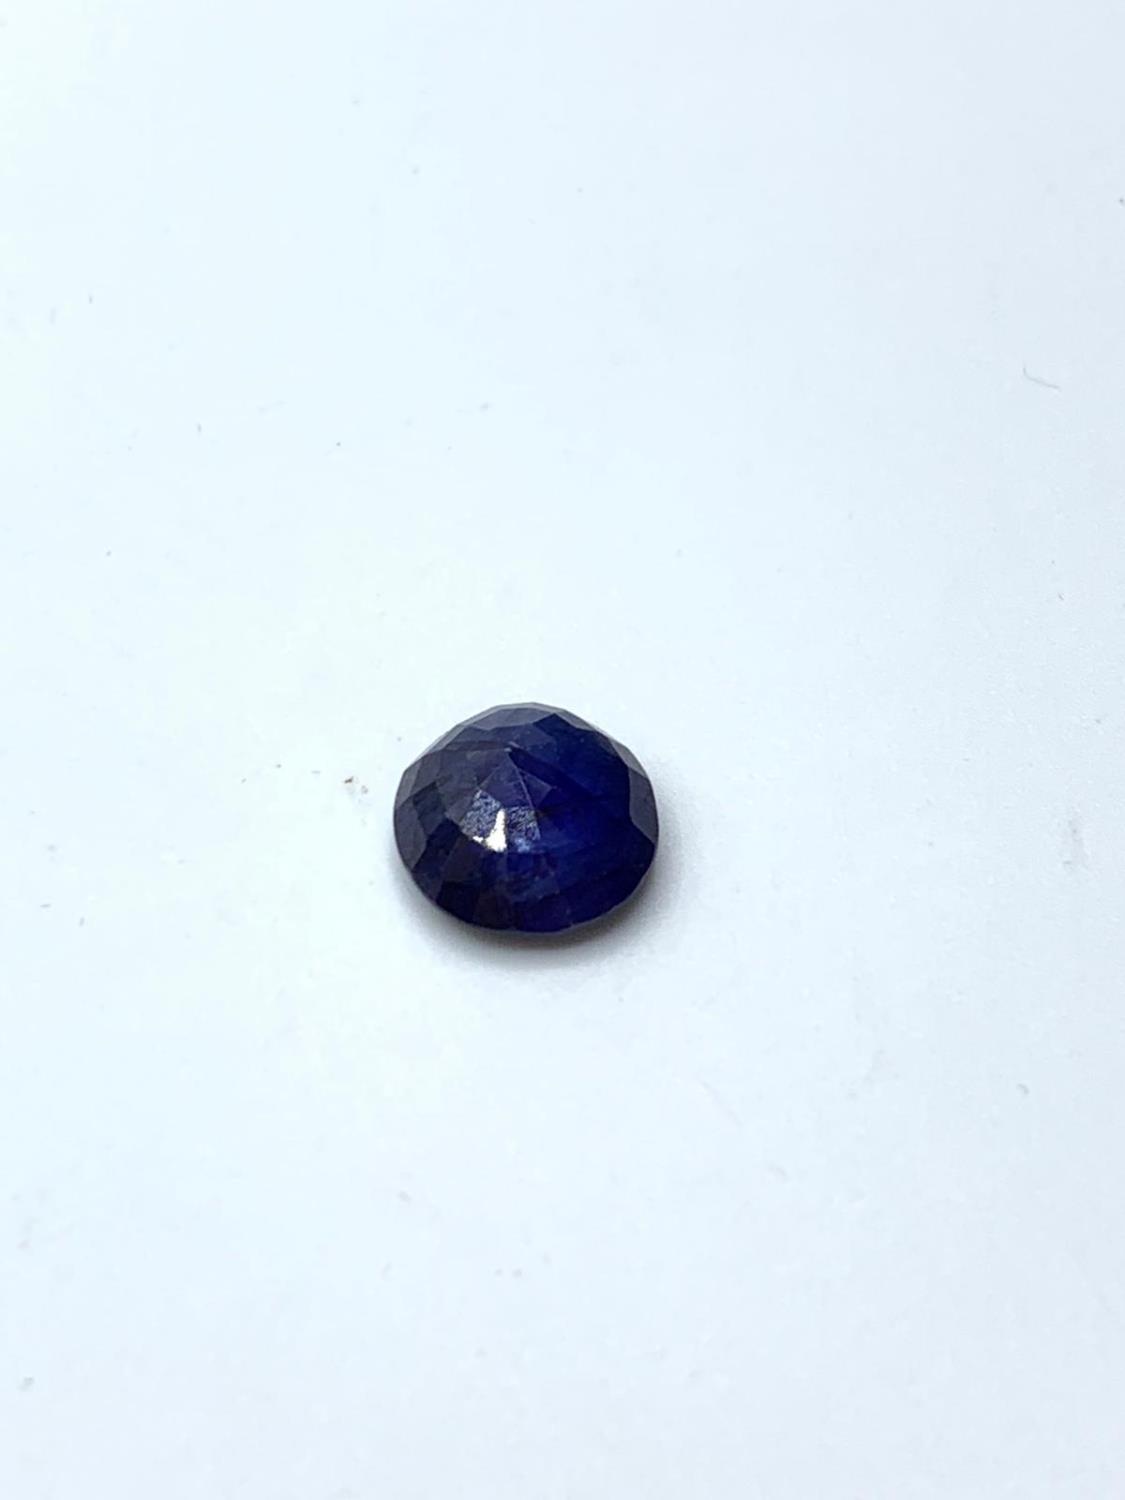 5.73 Ct Natural Sapphire. IDT Certified - Image 2 of 3